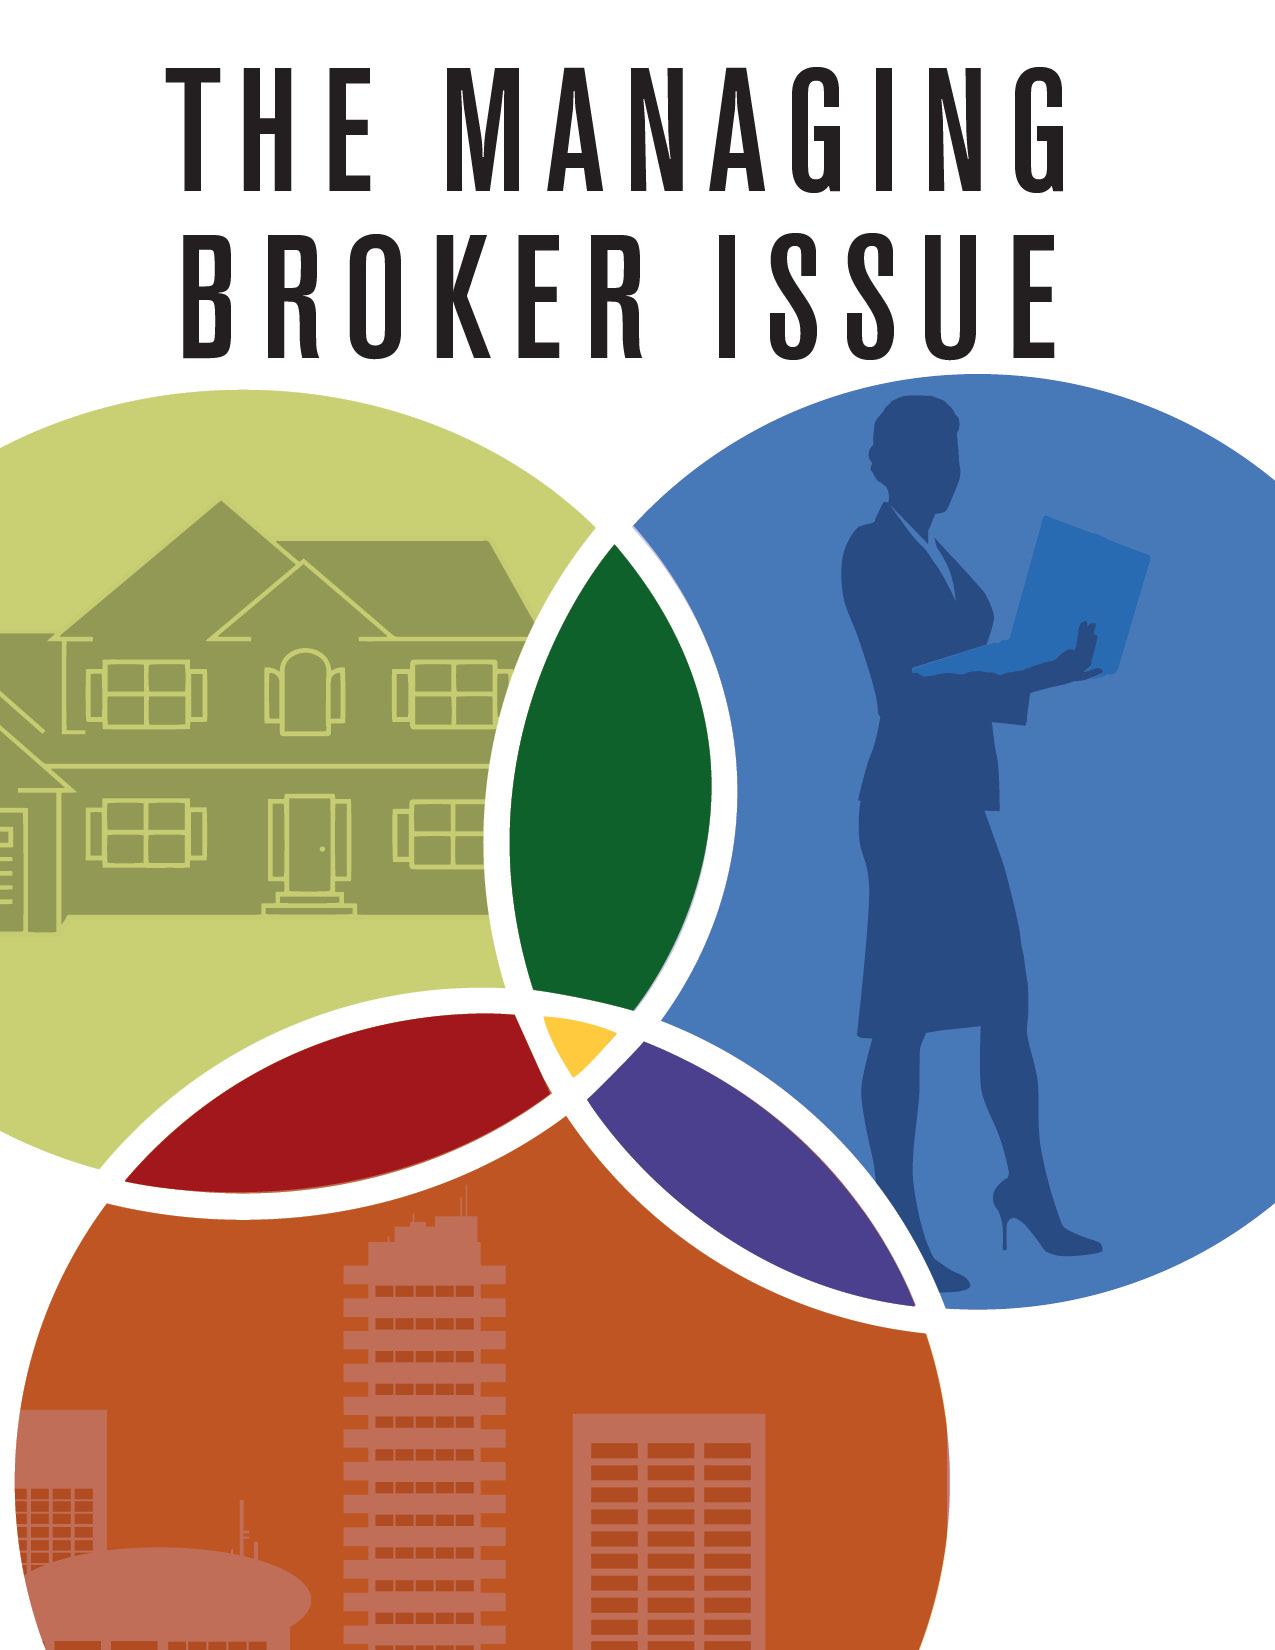 The Managing Brokers Issue - 4.20.14